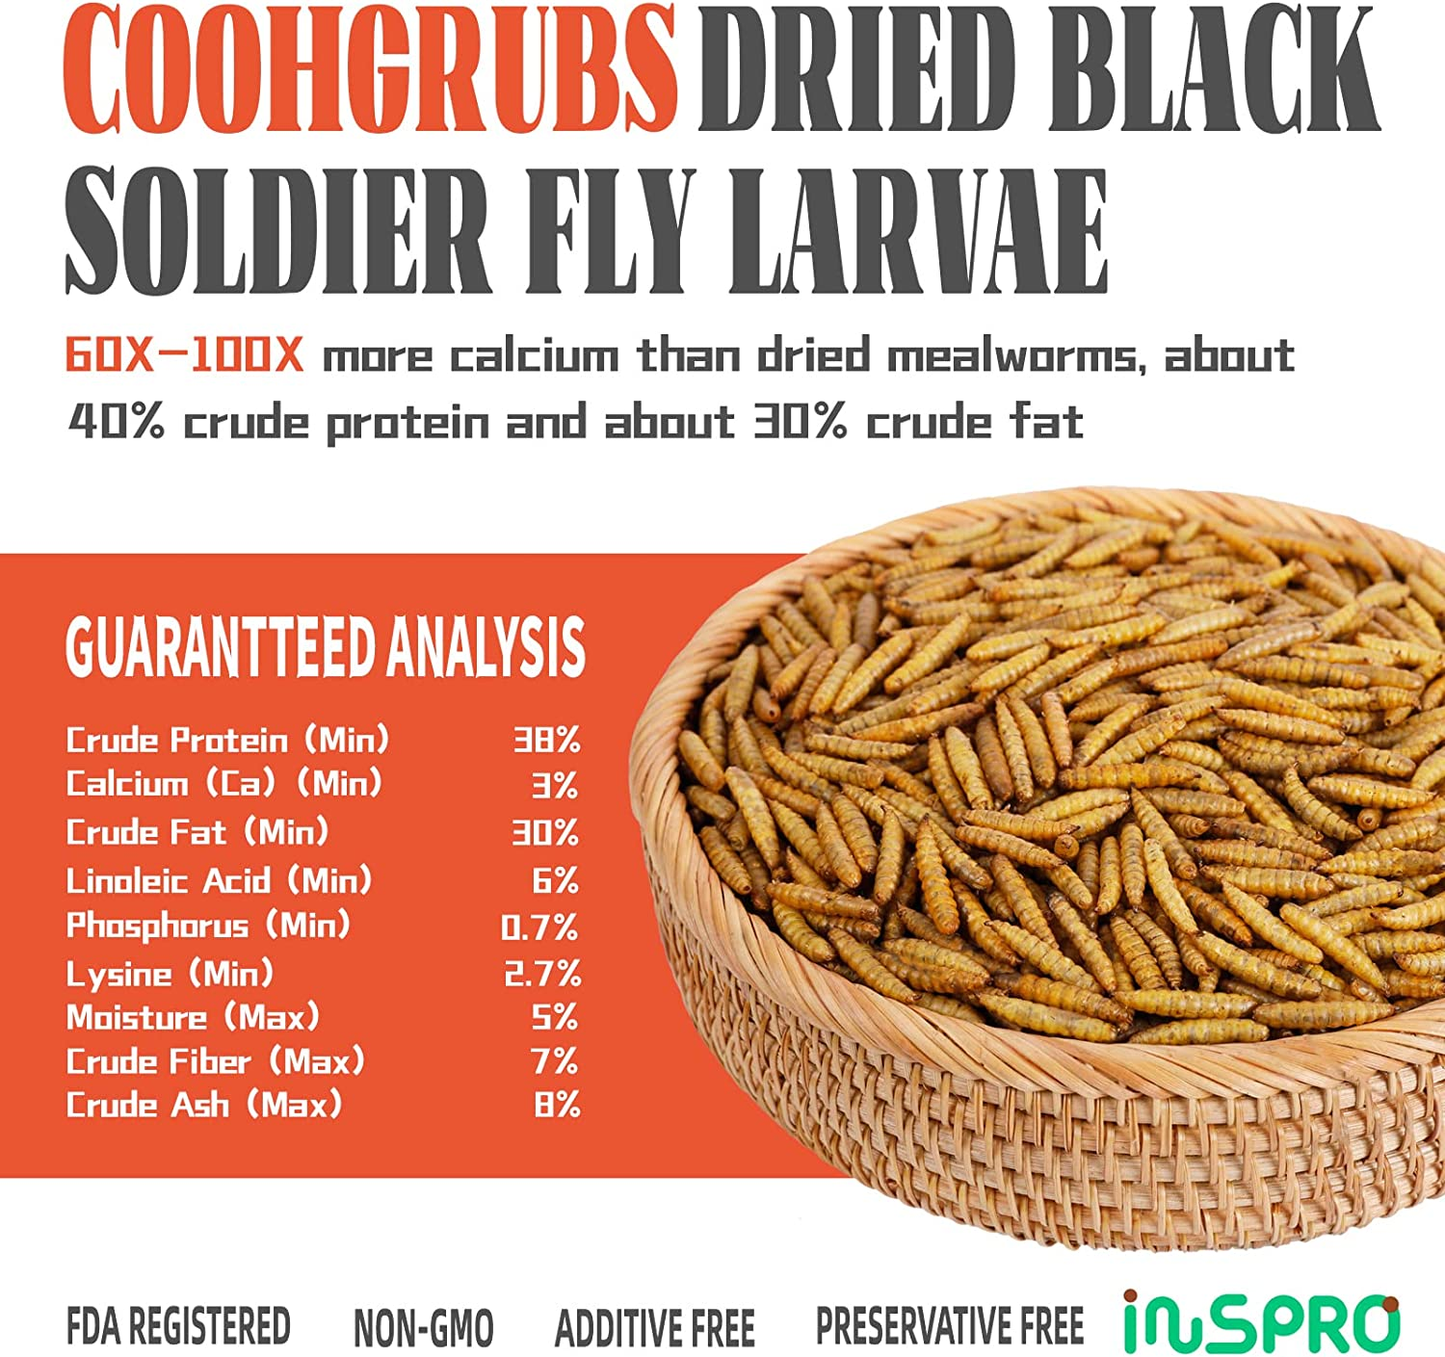 COOHGRUBS Premium Quality Dried Black Soldier Fly Larvae, Natural Nutritious Grubs for Chickens, High Protein and Calcium Rich Treats for Laying Hens, Ducks, Geese, Turkeys, Quails and More